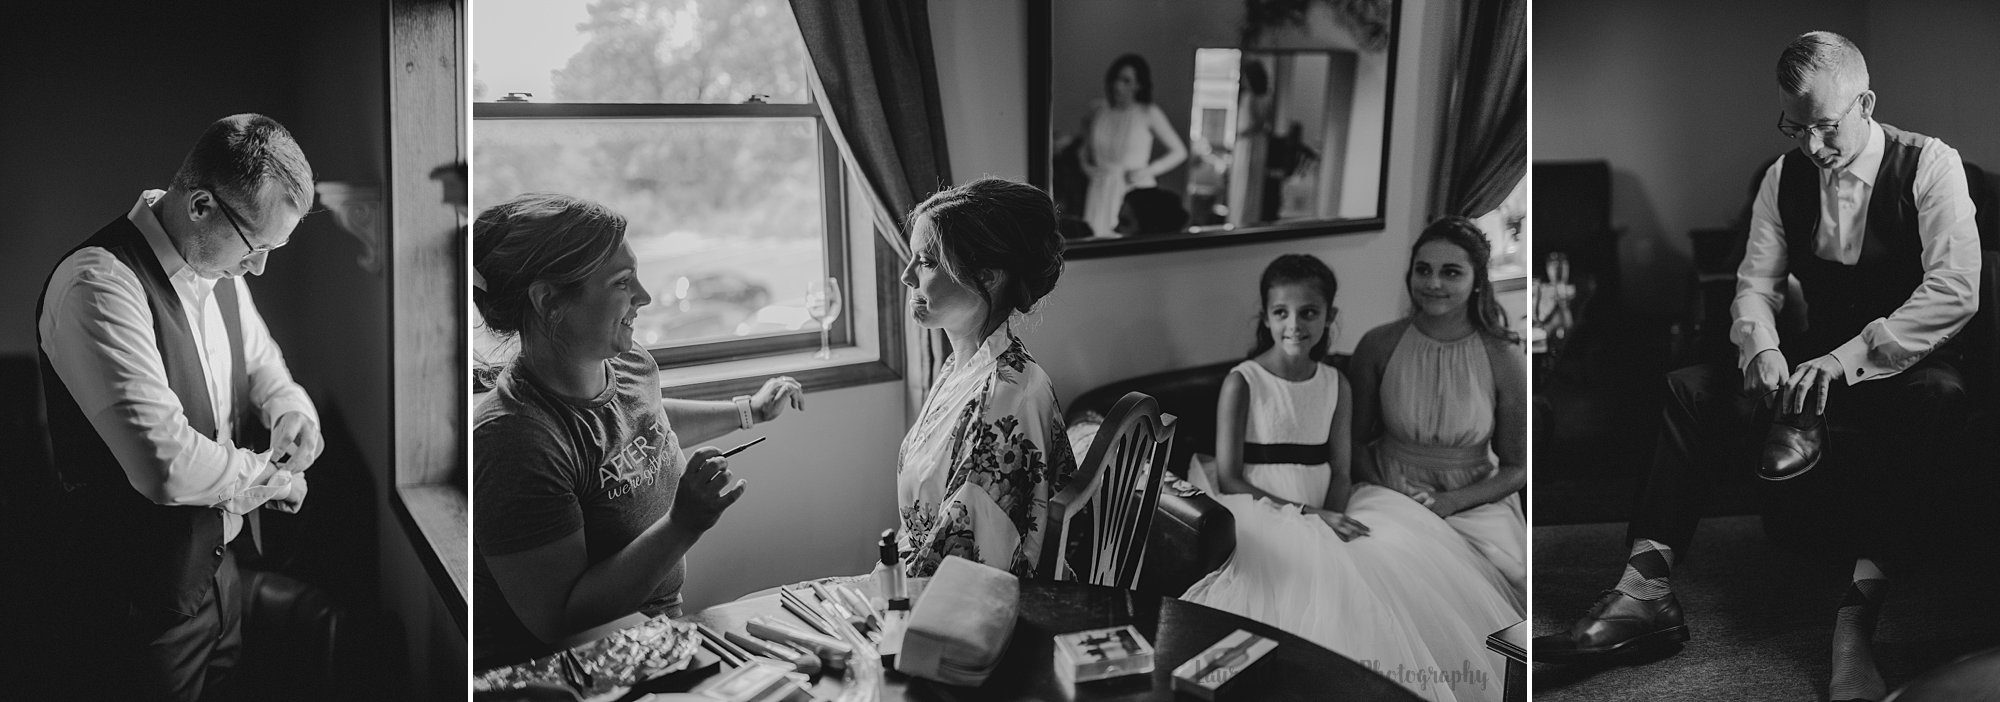 bride getting ready photos black and white